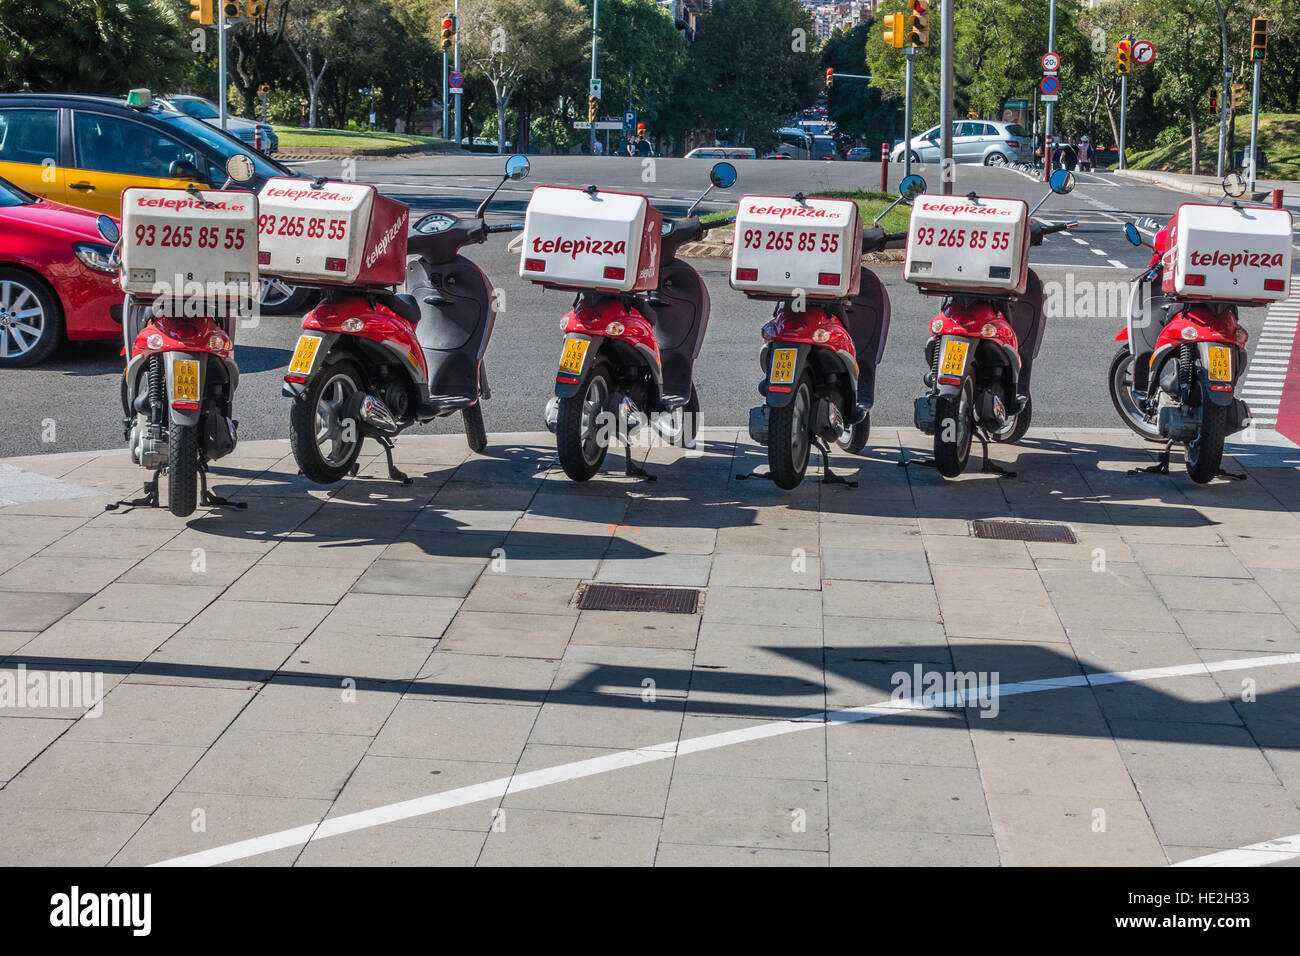 A line of Telepizza motoscooters parked on a sidewalk in Barcelona, Spain with their delivery boxes attached to their backs. Stock Photo